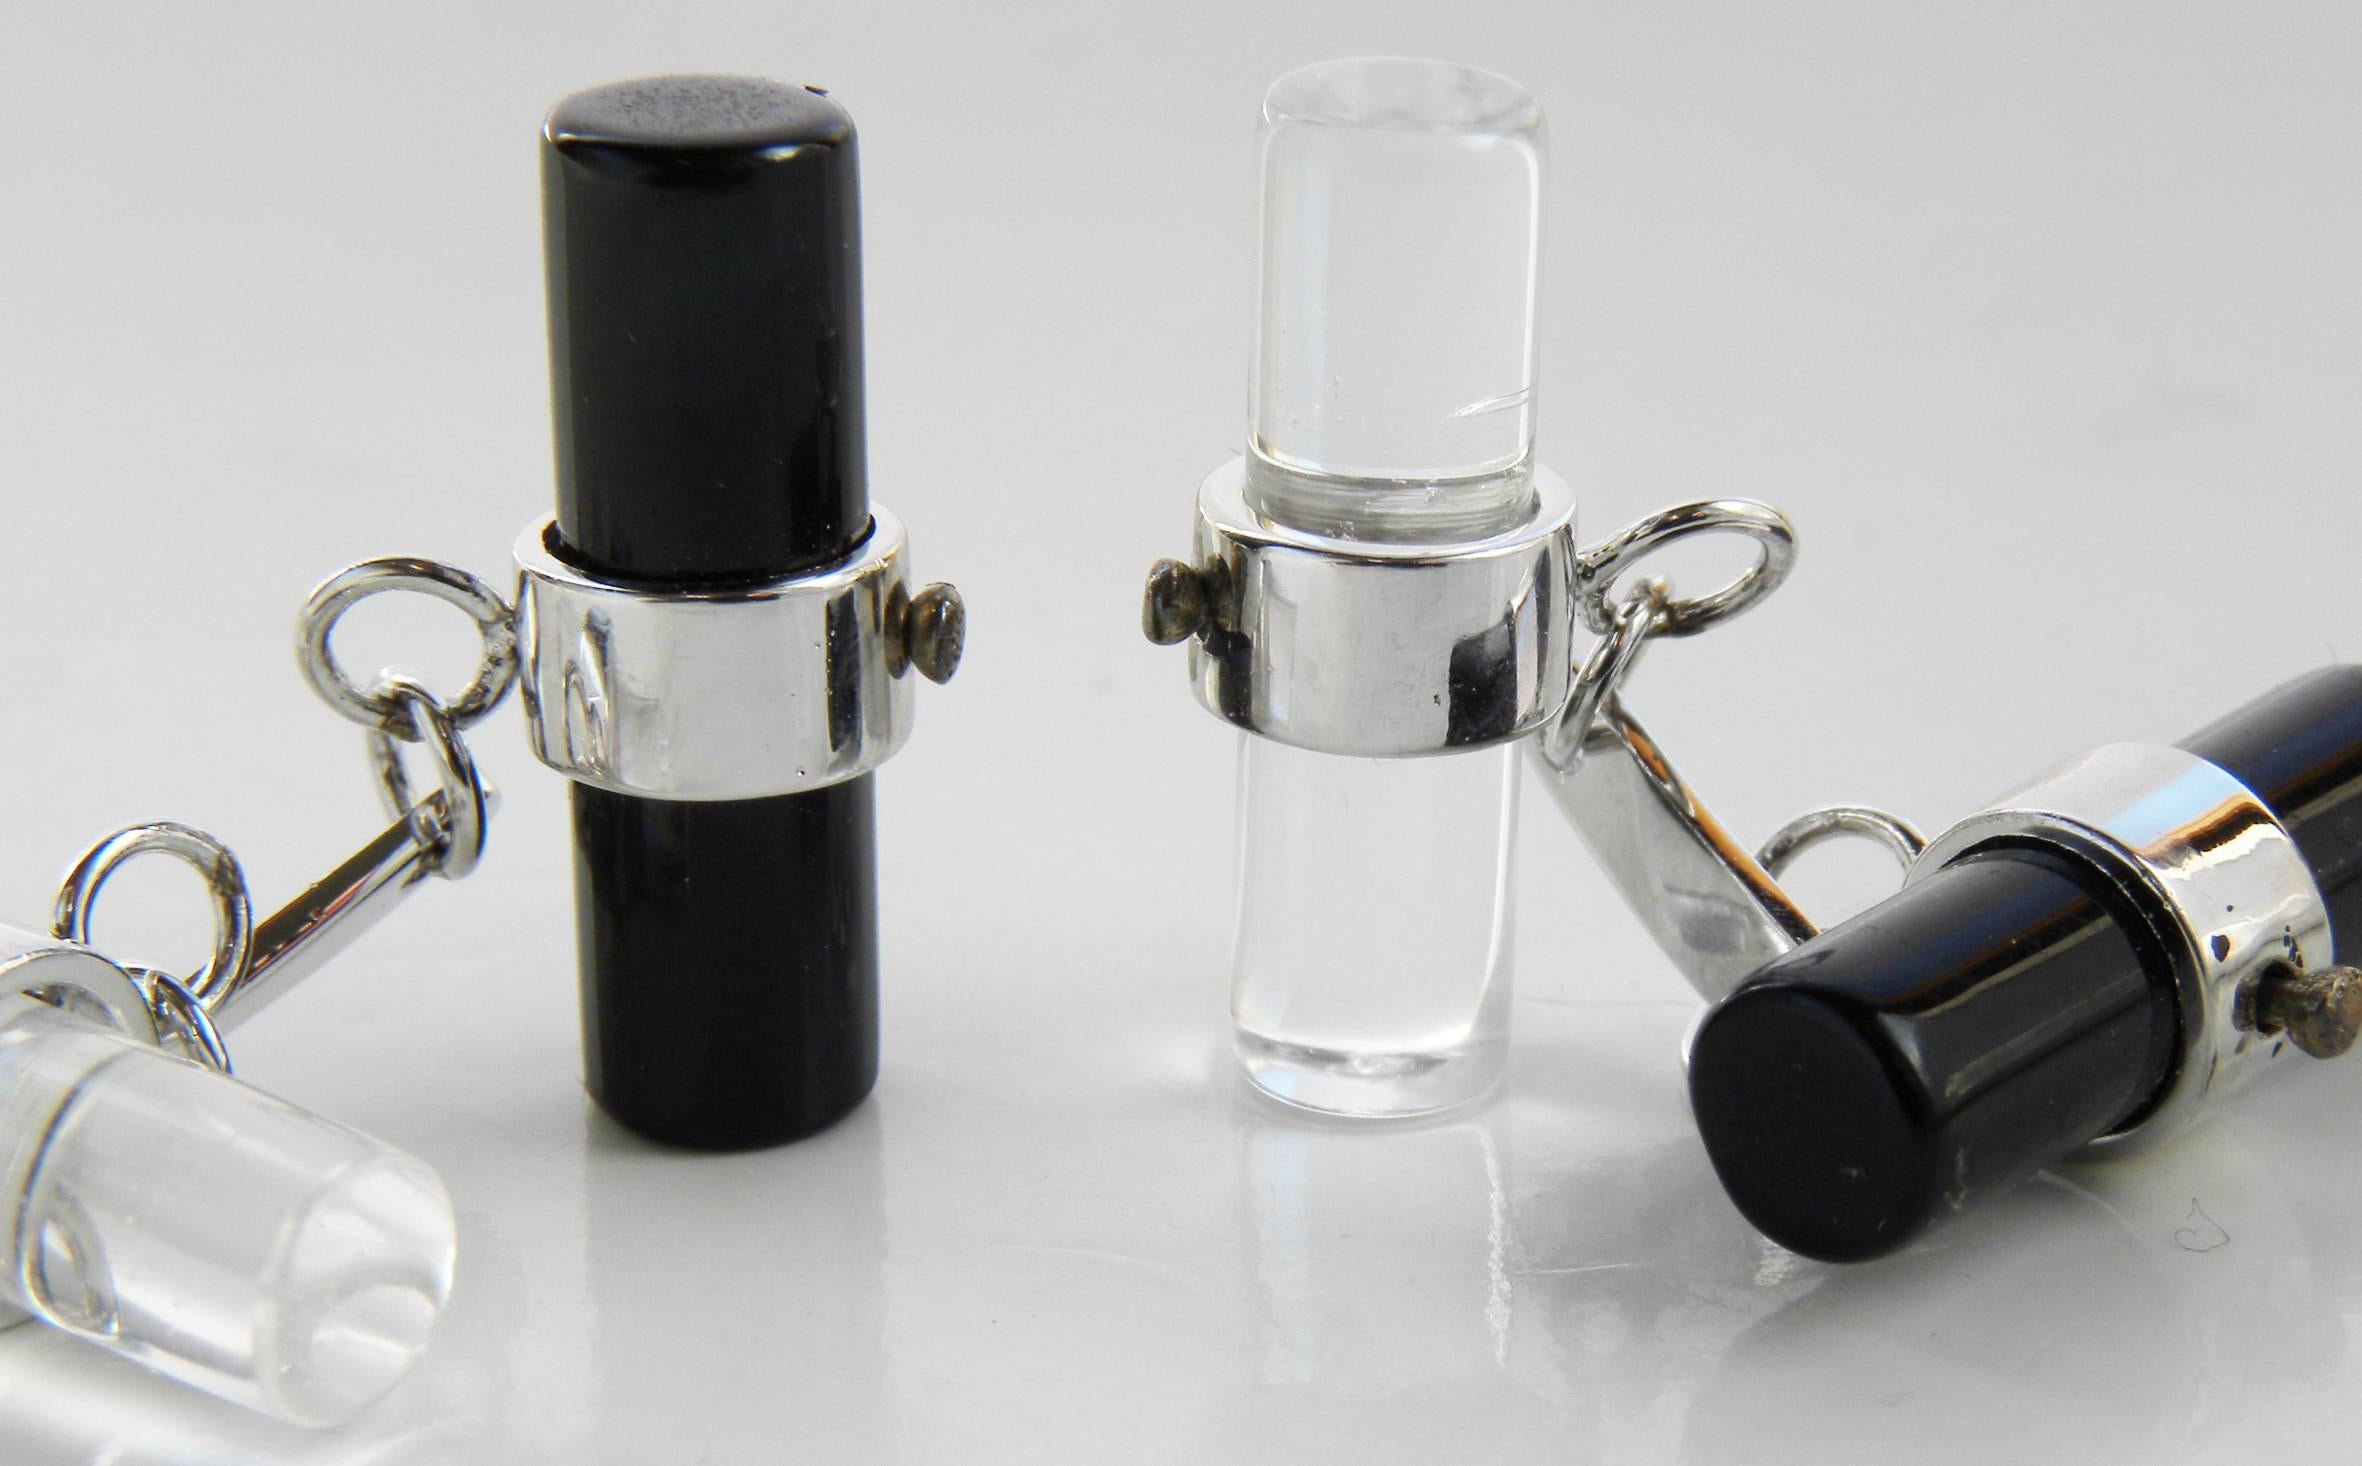 Smart, chic yet timeless Hand Inlaid Natural Rock Crystal and Onyx Baton in a Sterling Silver Setting.
In our fitted smart suede leather box and pouch.